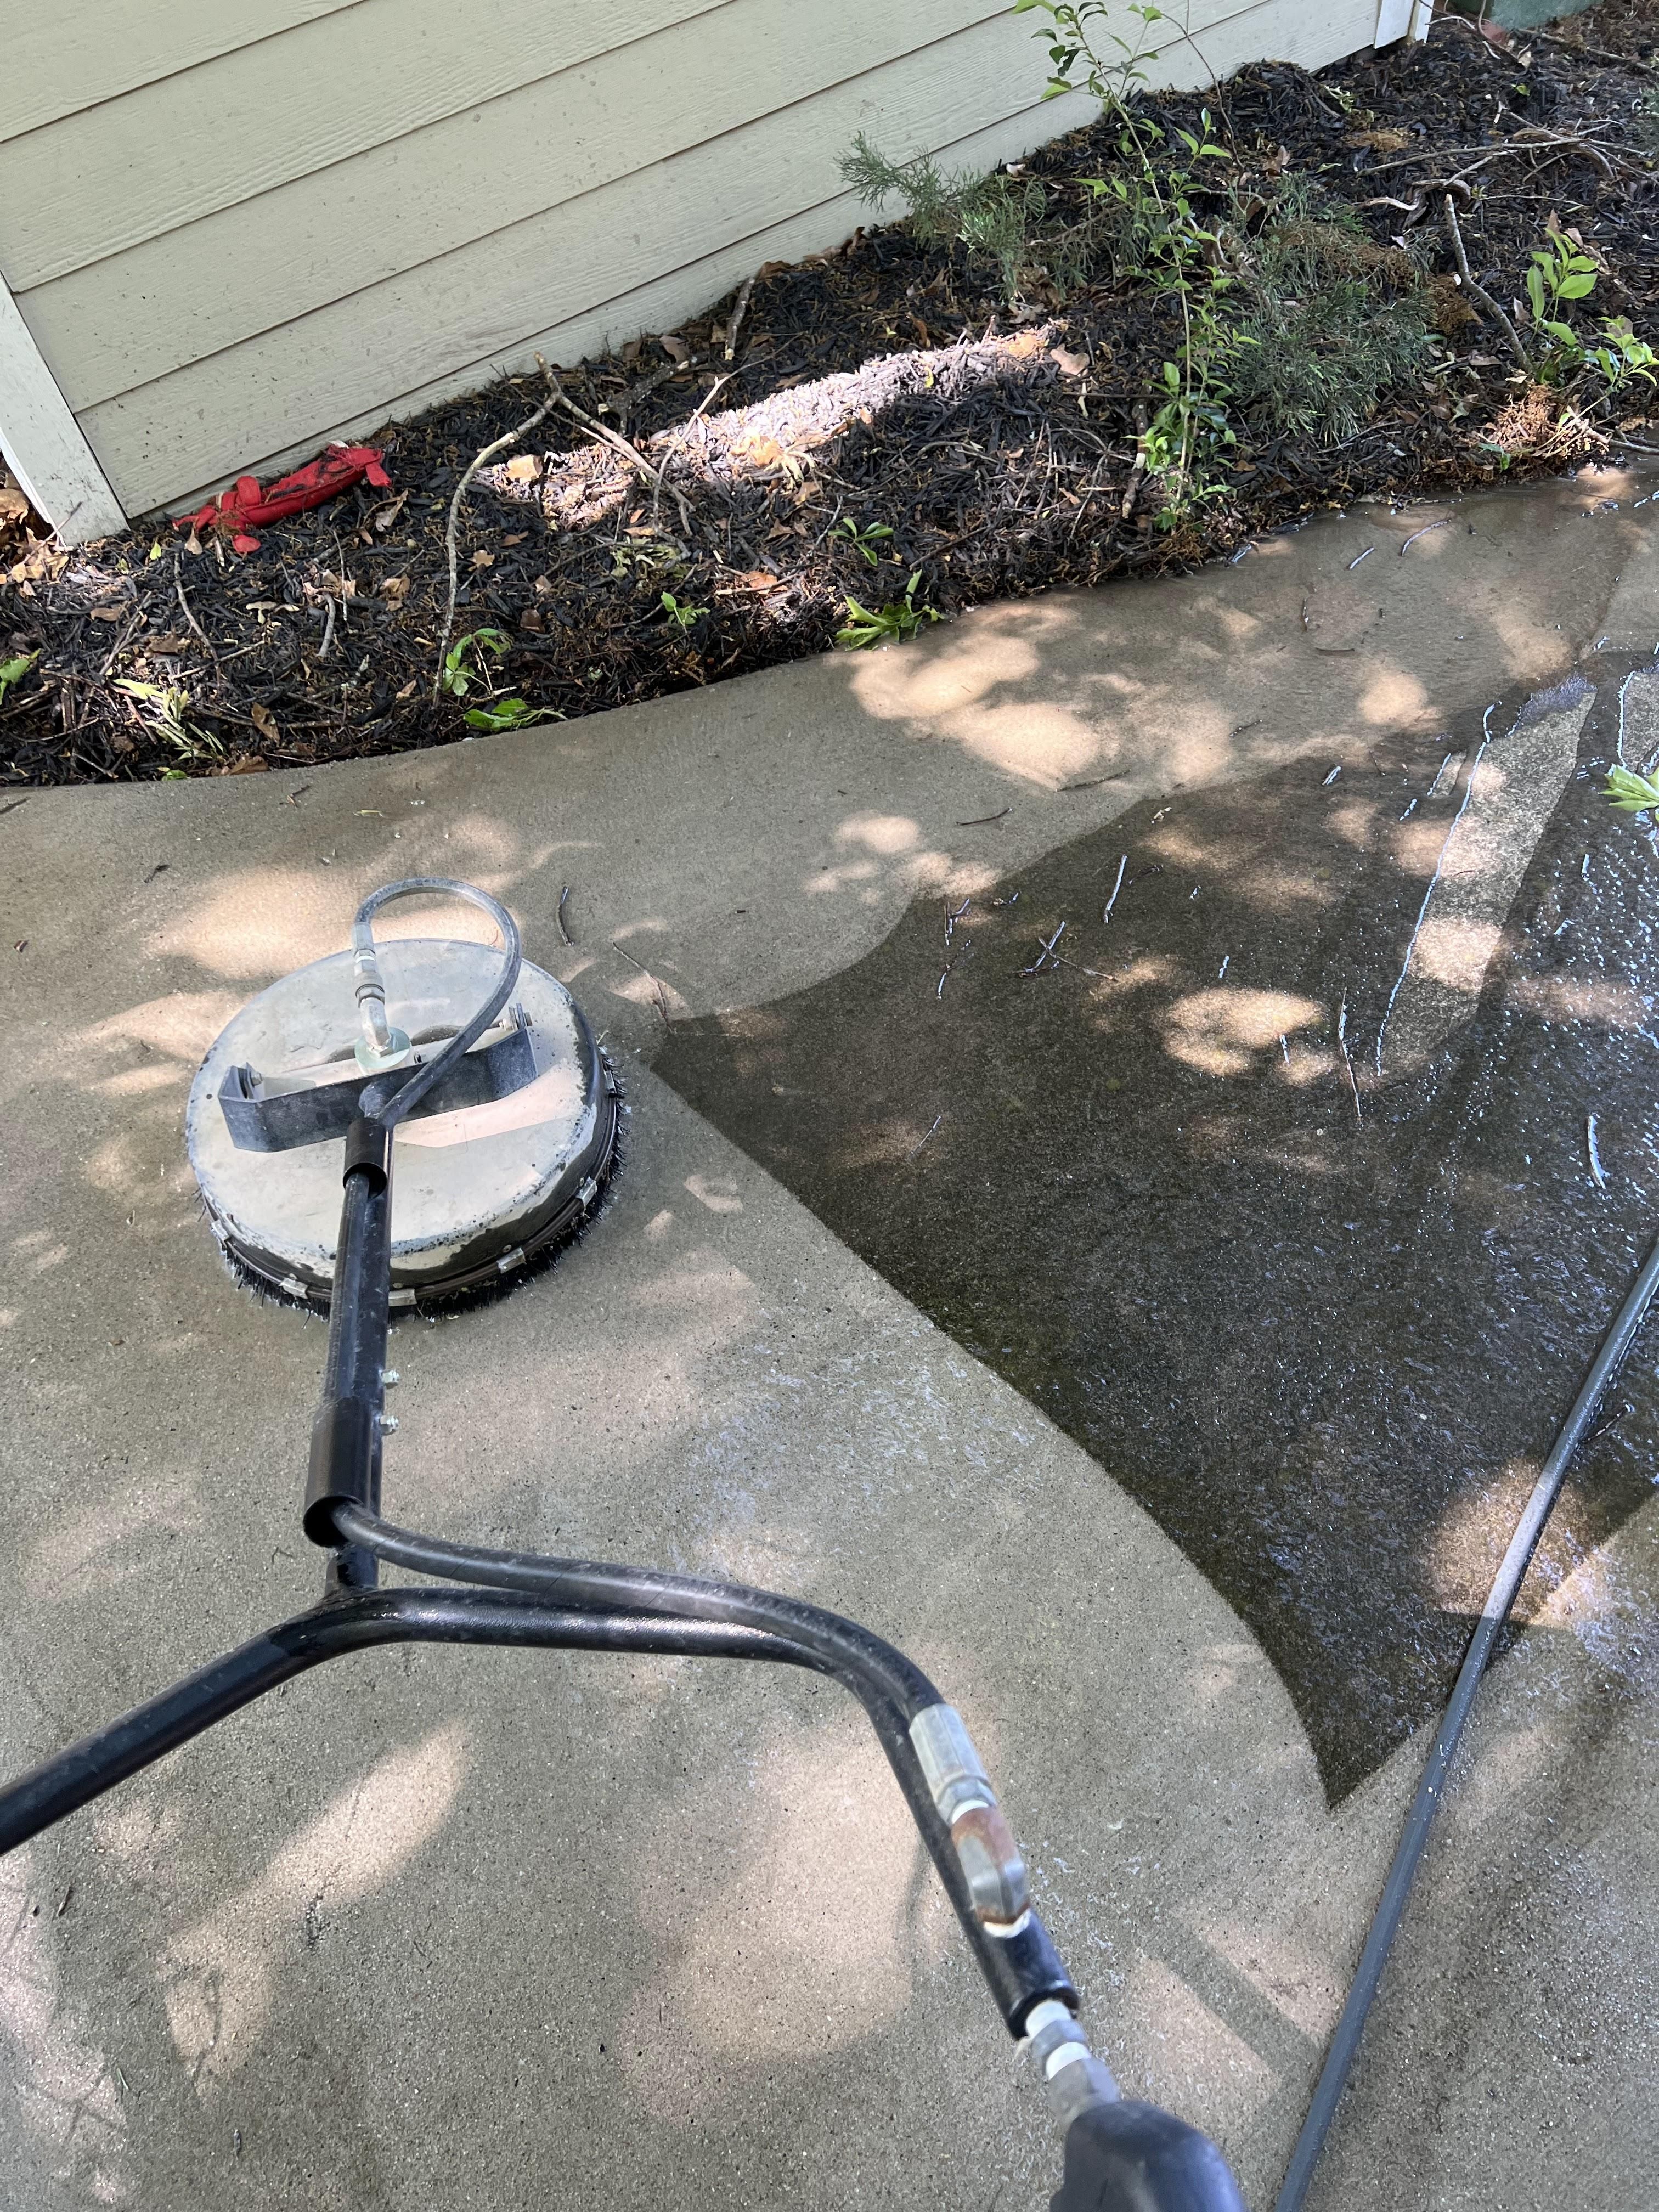 Home Softwash for JB Applewhite's Pressure Washing in Anderson, SC